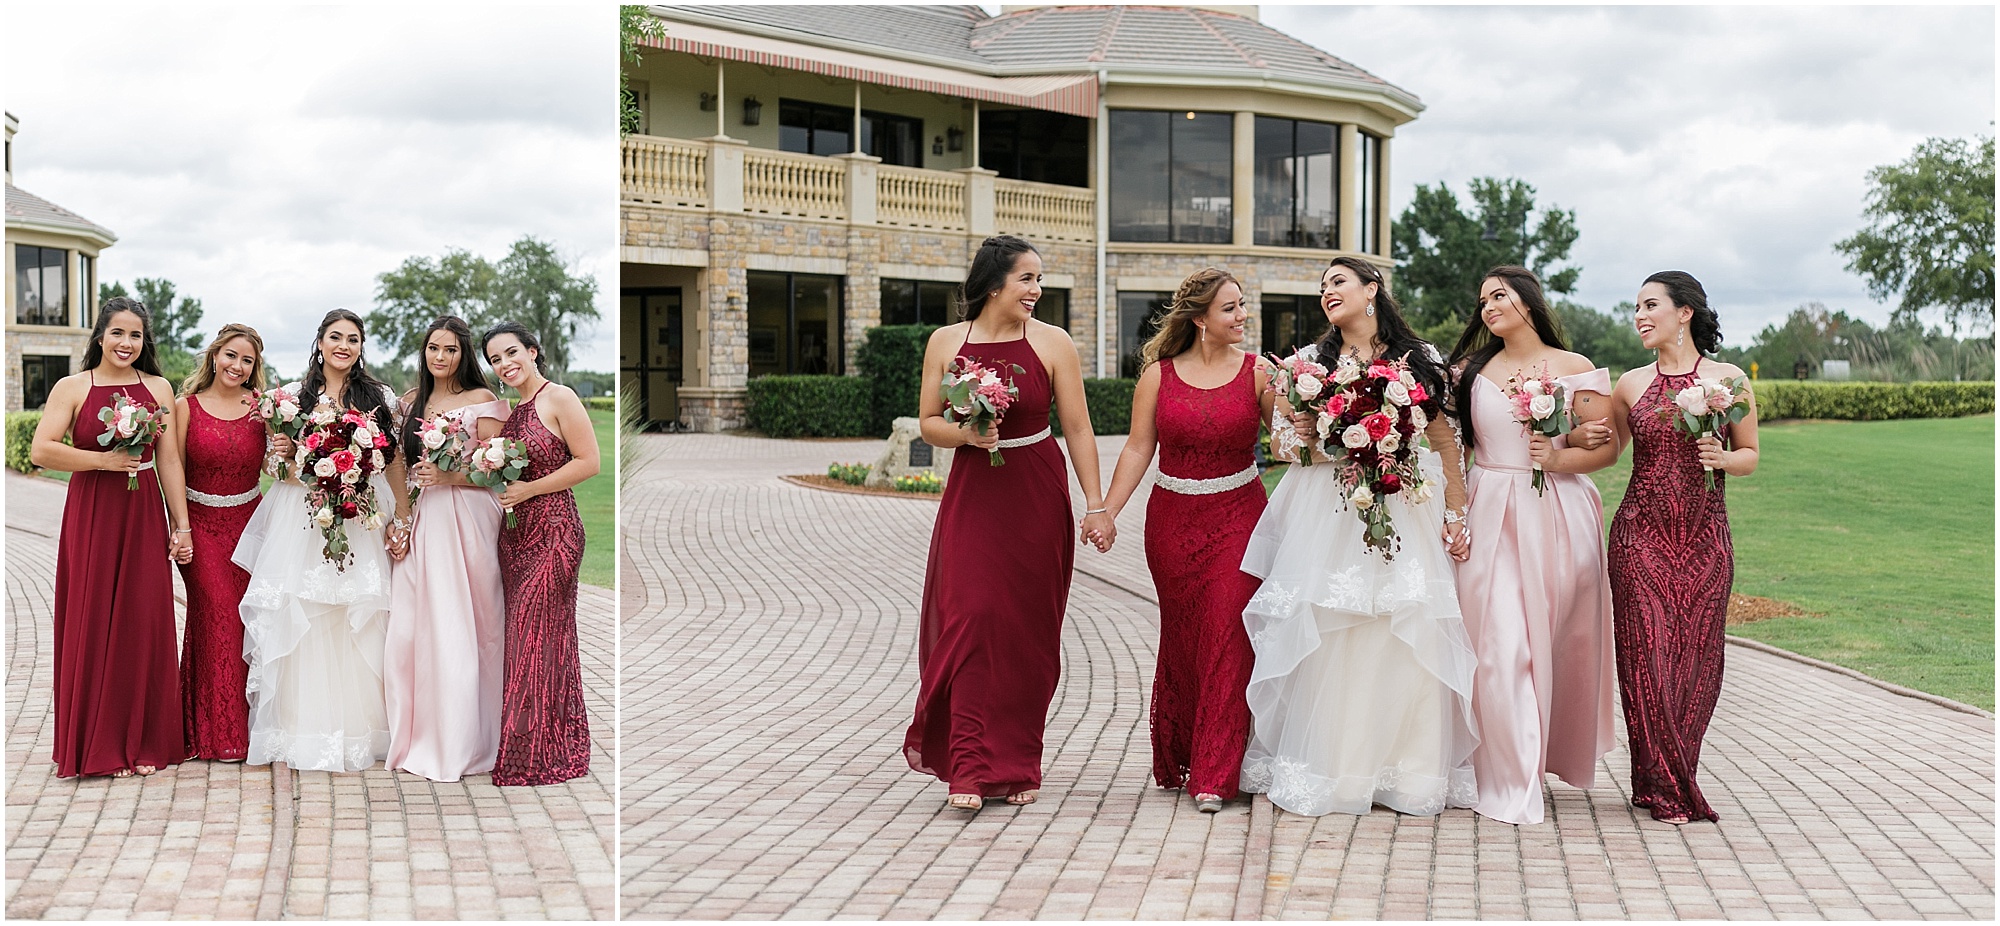 The brides wedding party in mismatched dresses in shades of reds and pinks. 